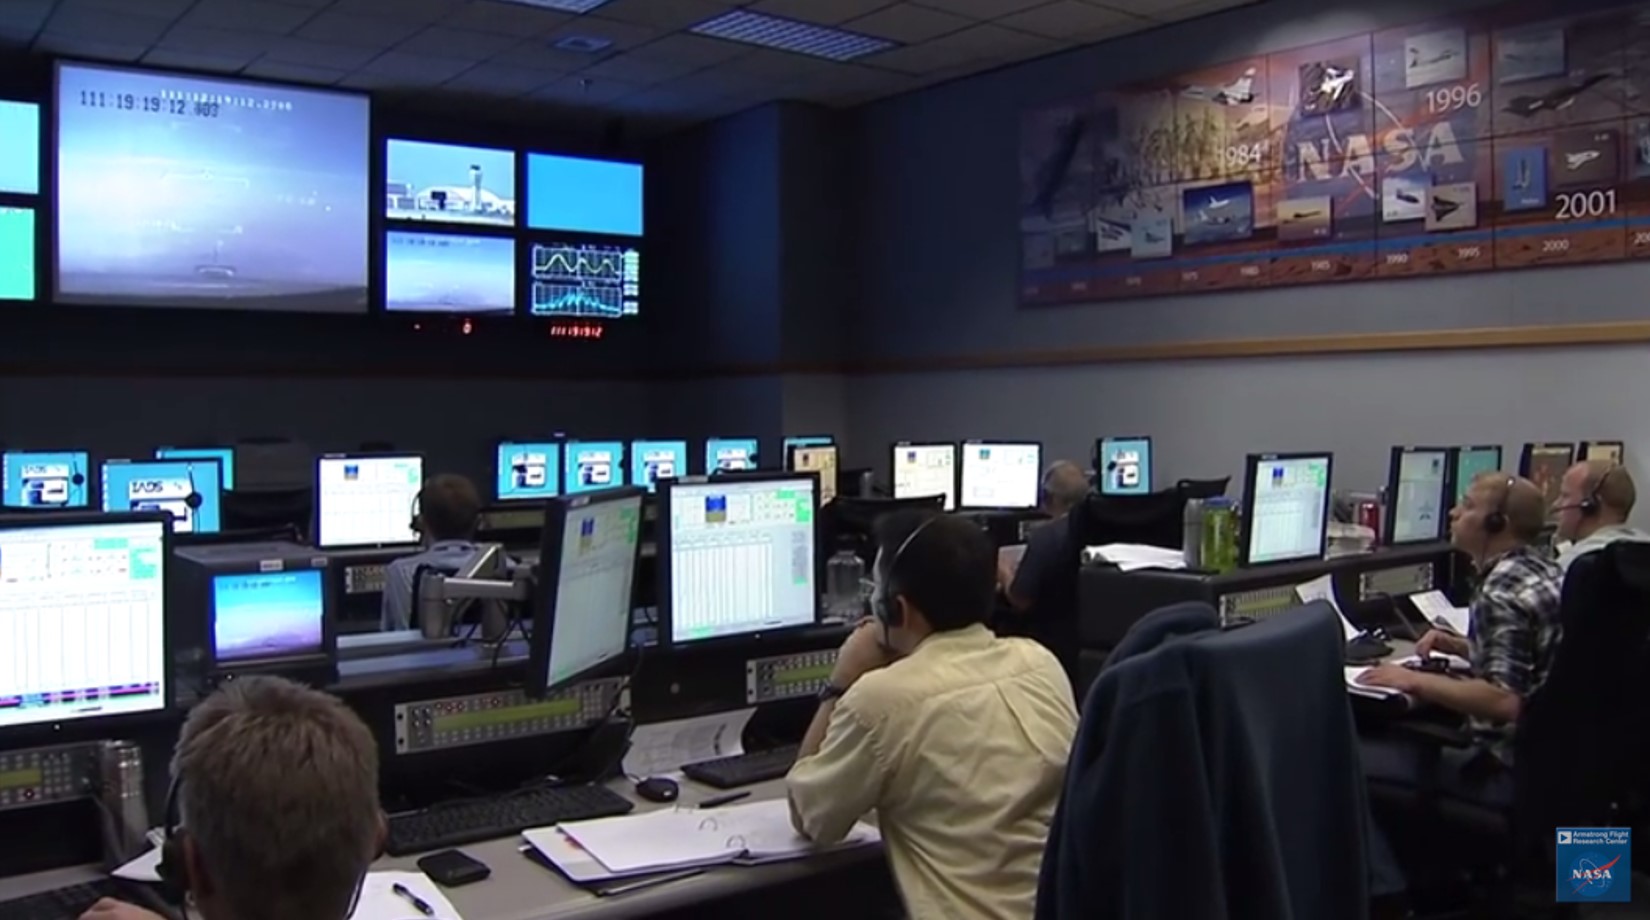 Mission control room with rows of computer stations. A large monitor on the wall at the front of the room shows nine video feeds, four small video feeds on either side of one large video feed in the center.